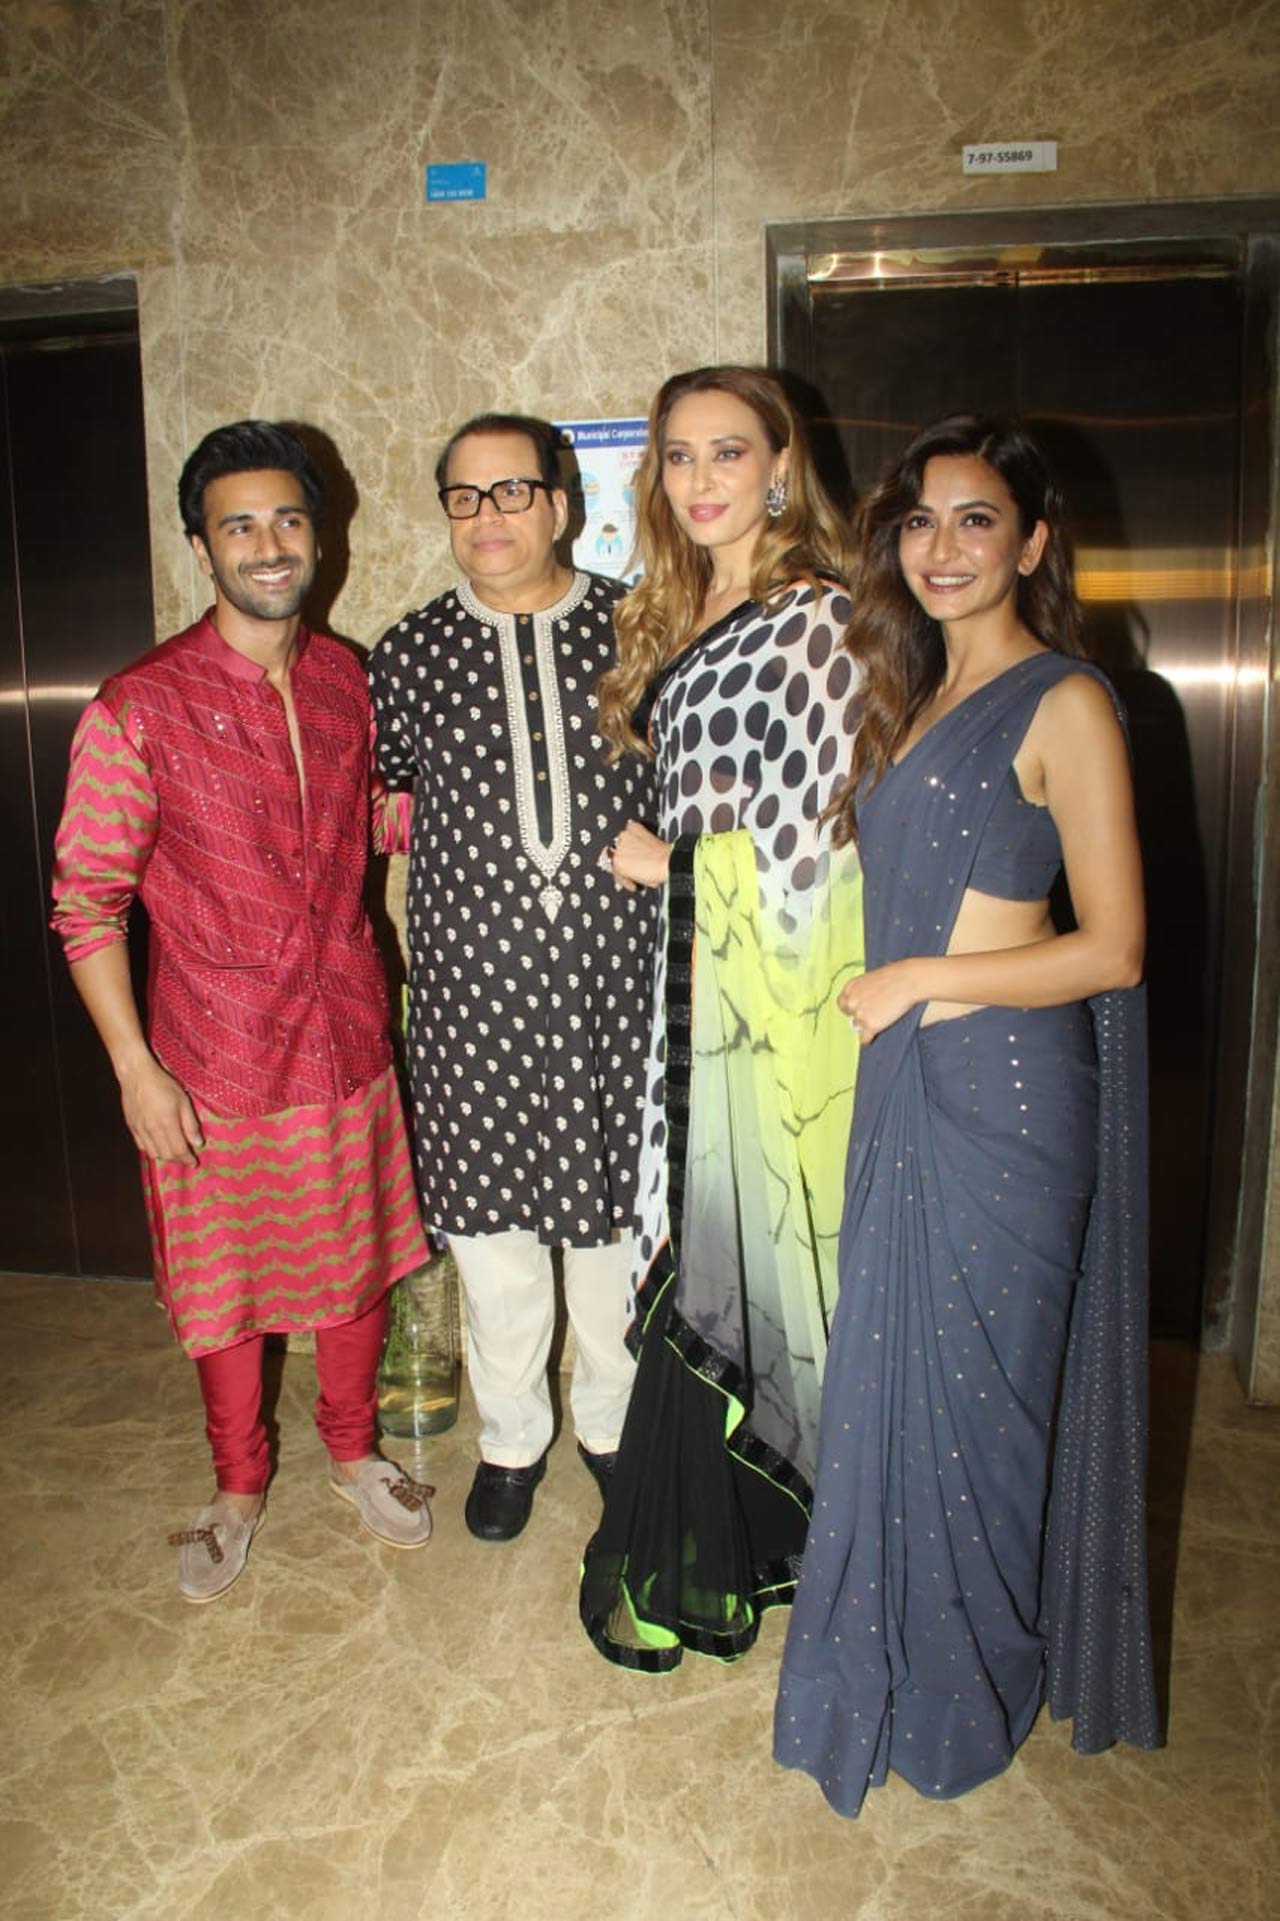 Ramesh Taurani's Diwali celebration was a lit affair as it brought celebrities like Pulkit Samrat, Kriti Kharbanda and Iulia Vantur among others under a roof. While Pulkit showed up in a sherwani, Kriti flaunted her svelte physique in a grey saree. Iulia's chic sartorial choice was appreciated by a lot of fashionistas on social media.